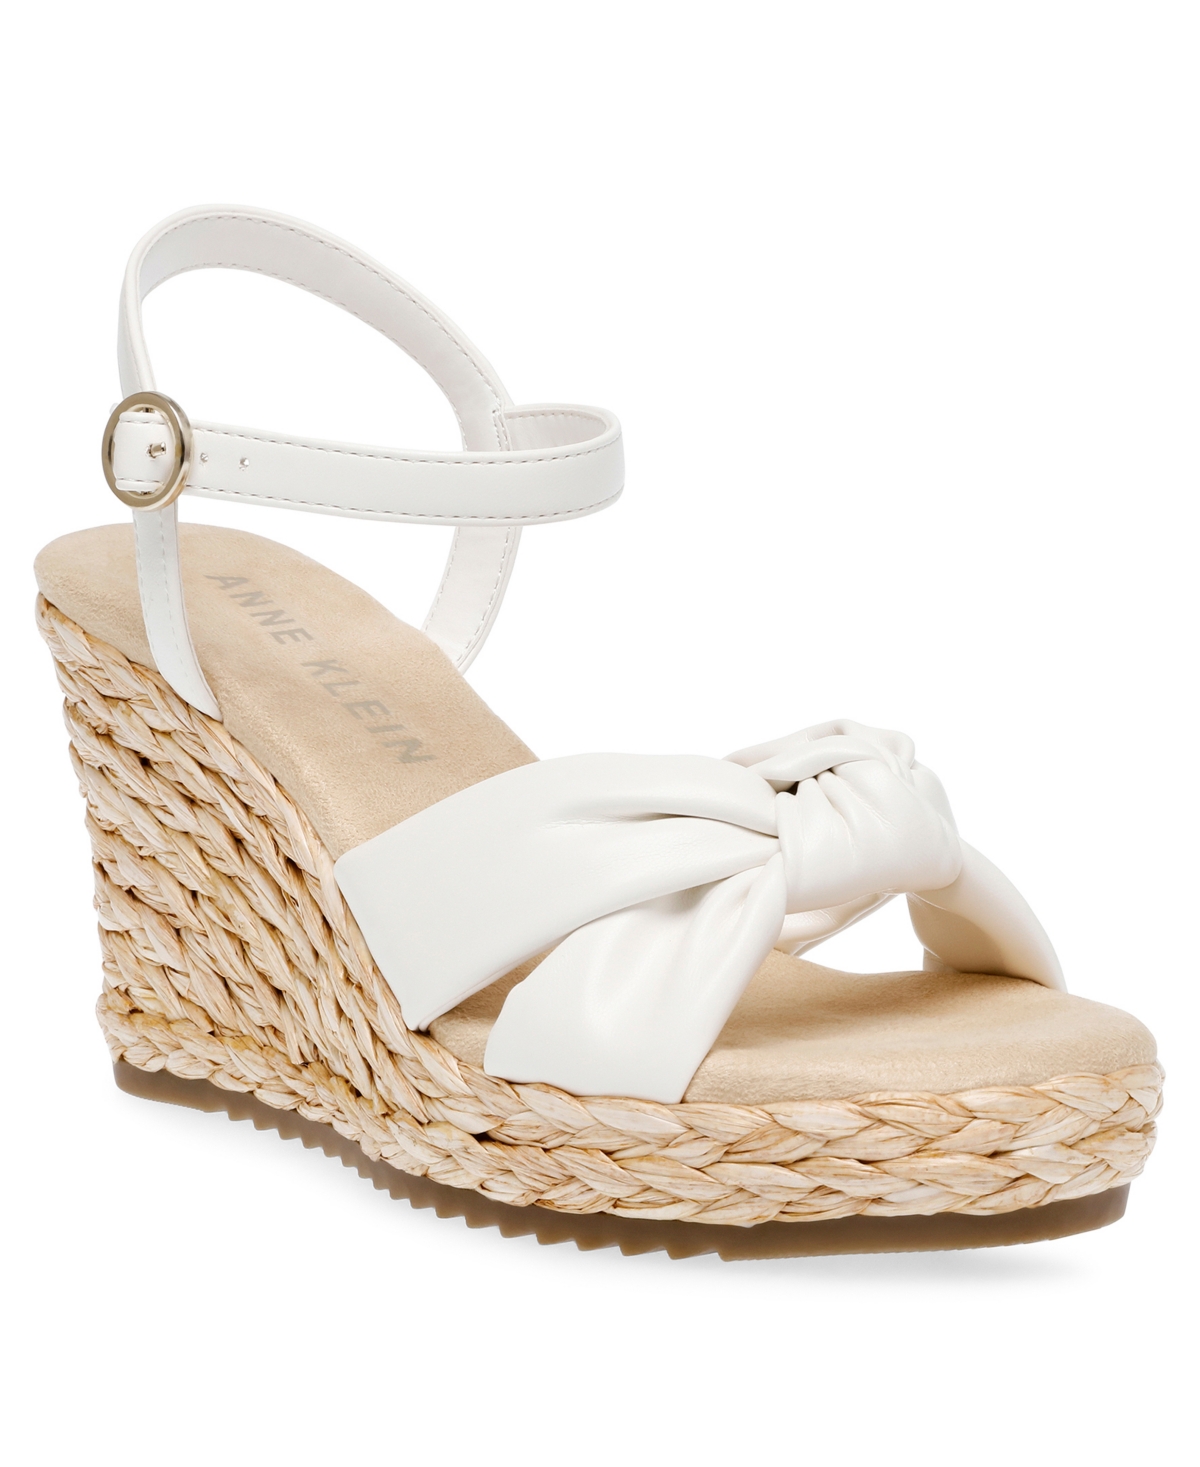 Women's Wheatley Ankle Strap Espadrille Wedge Sandals - White Smooth